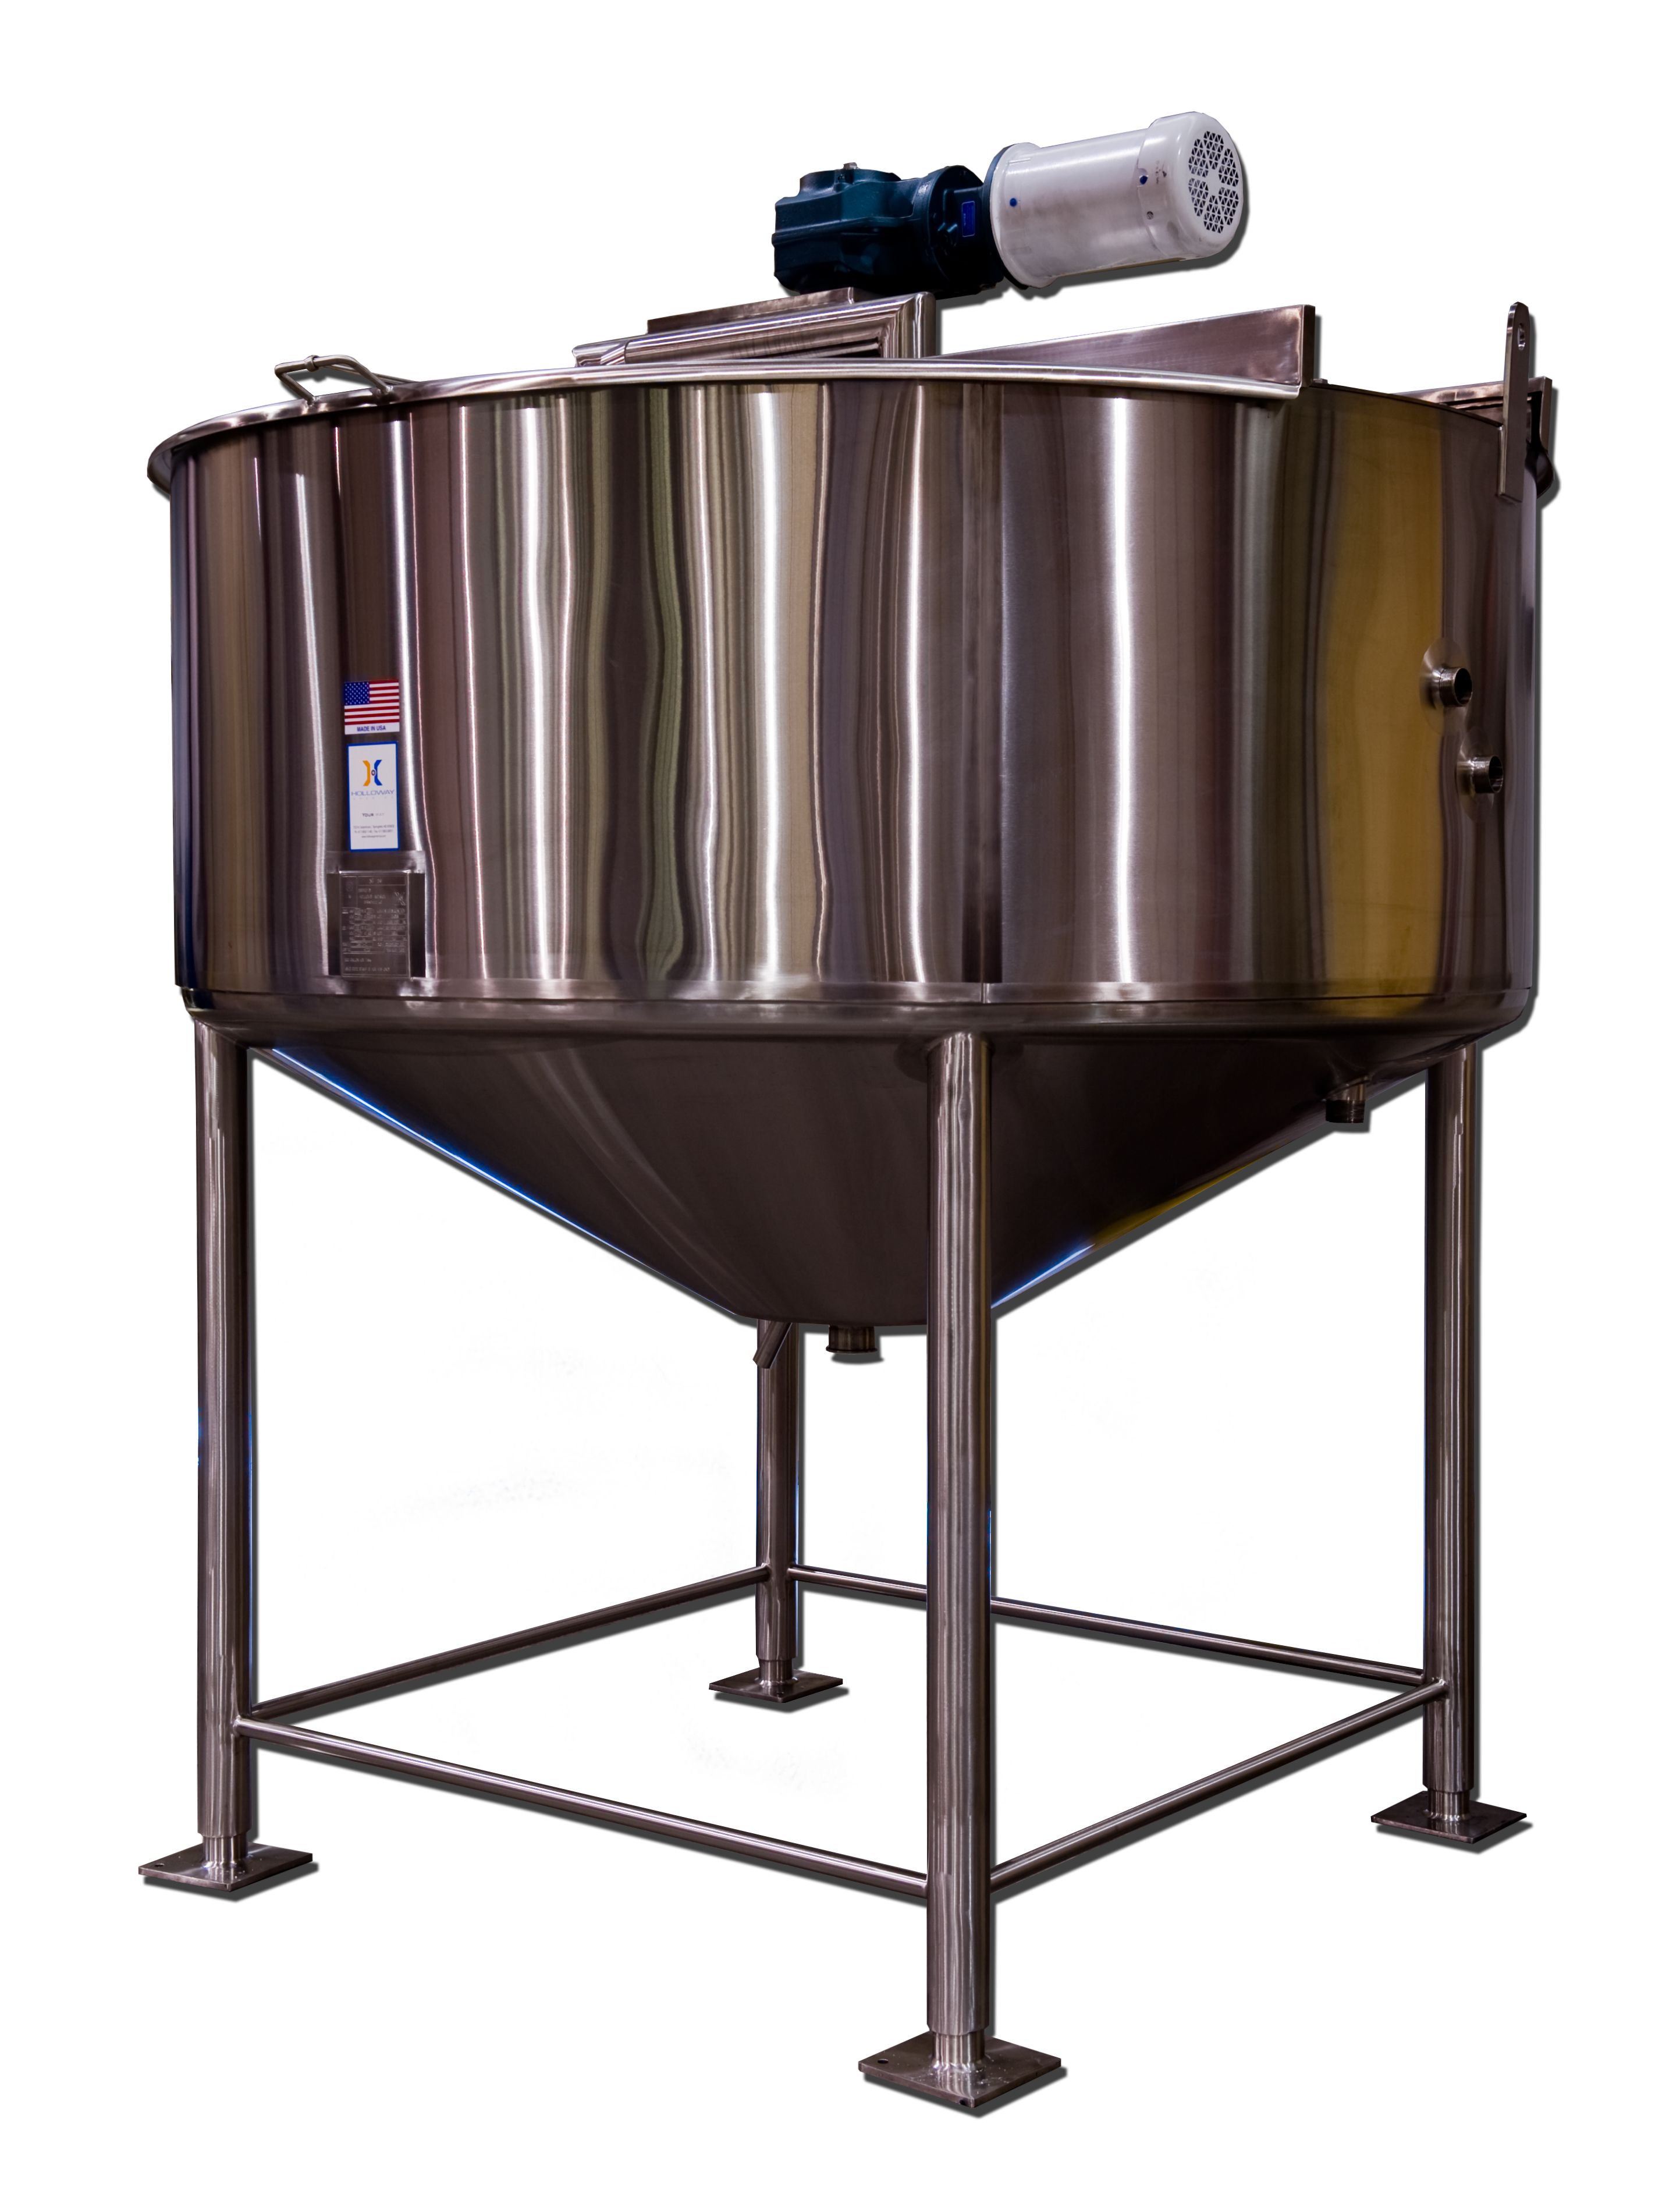 In addition to mixing tanks like this one, HOLLOWAY also engineers blending tanks and storage tanks for its beverage client partners.